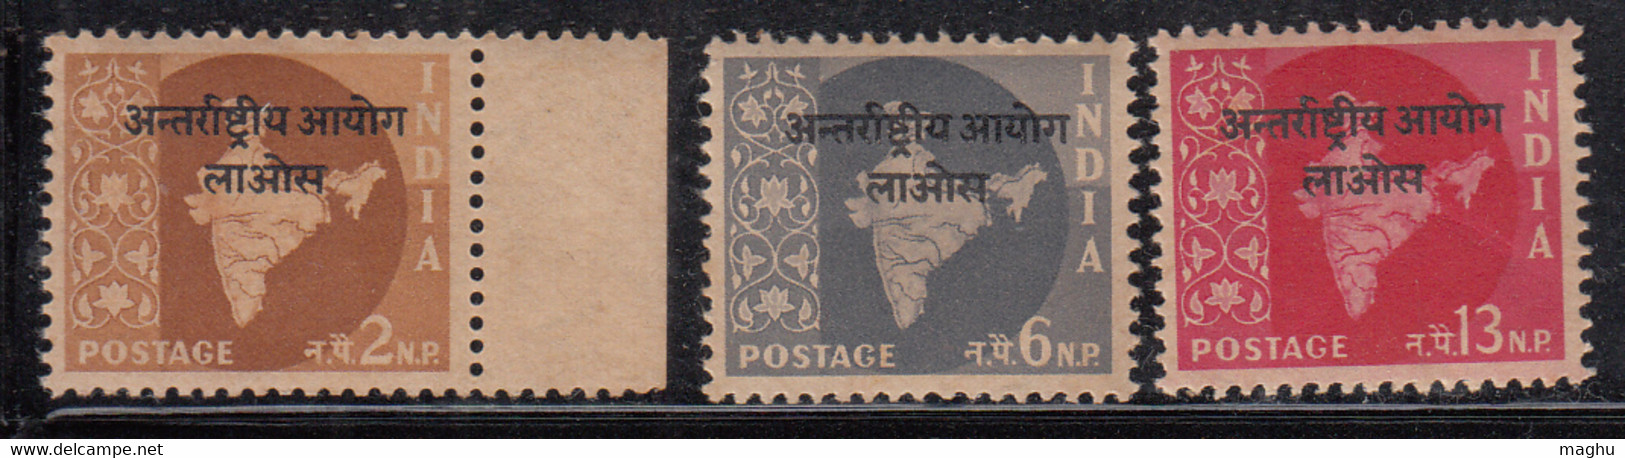 Star Watermark Series, Laos Opt. On 3v Map, India MNH 1957 - Military Service Stamp